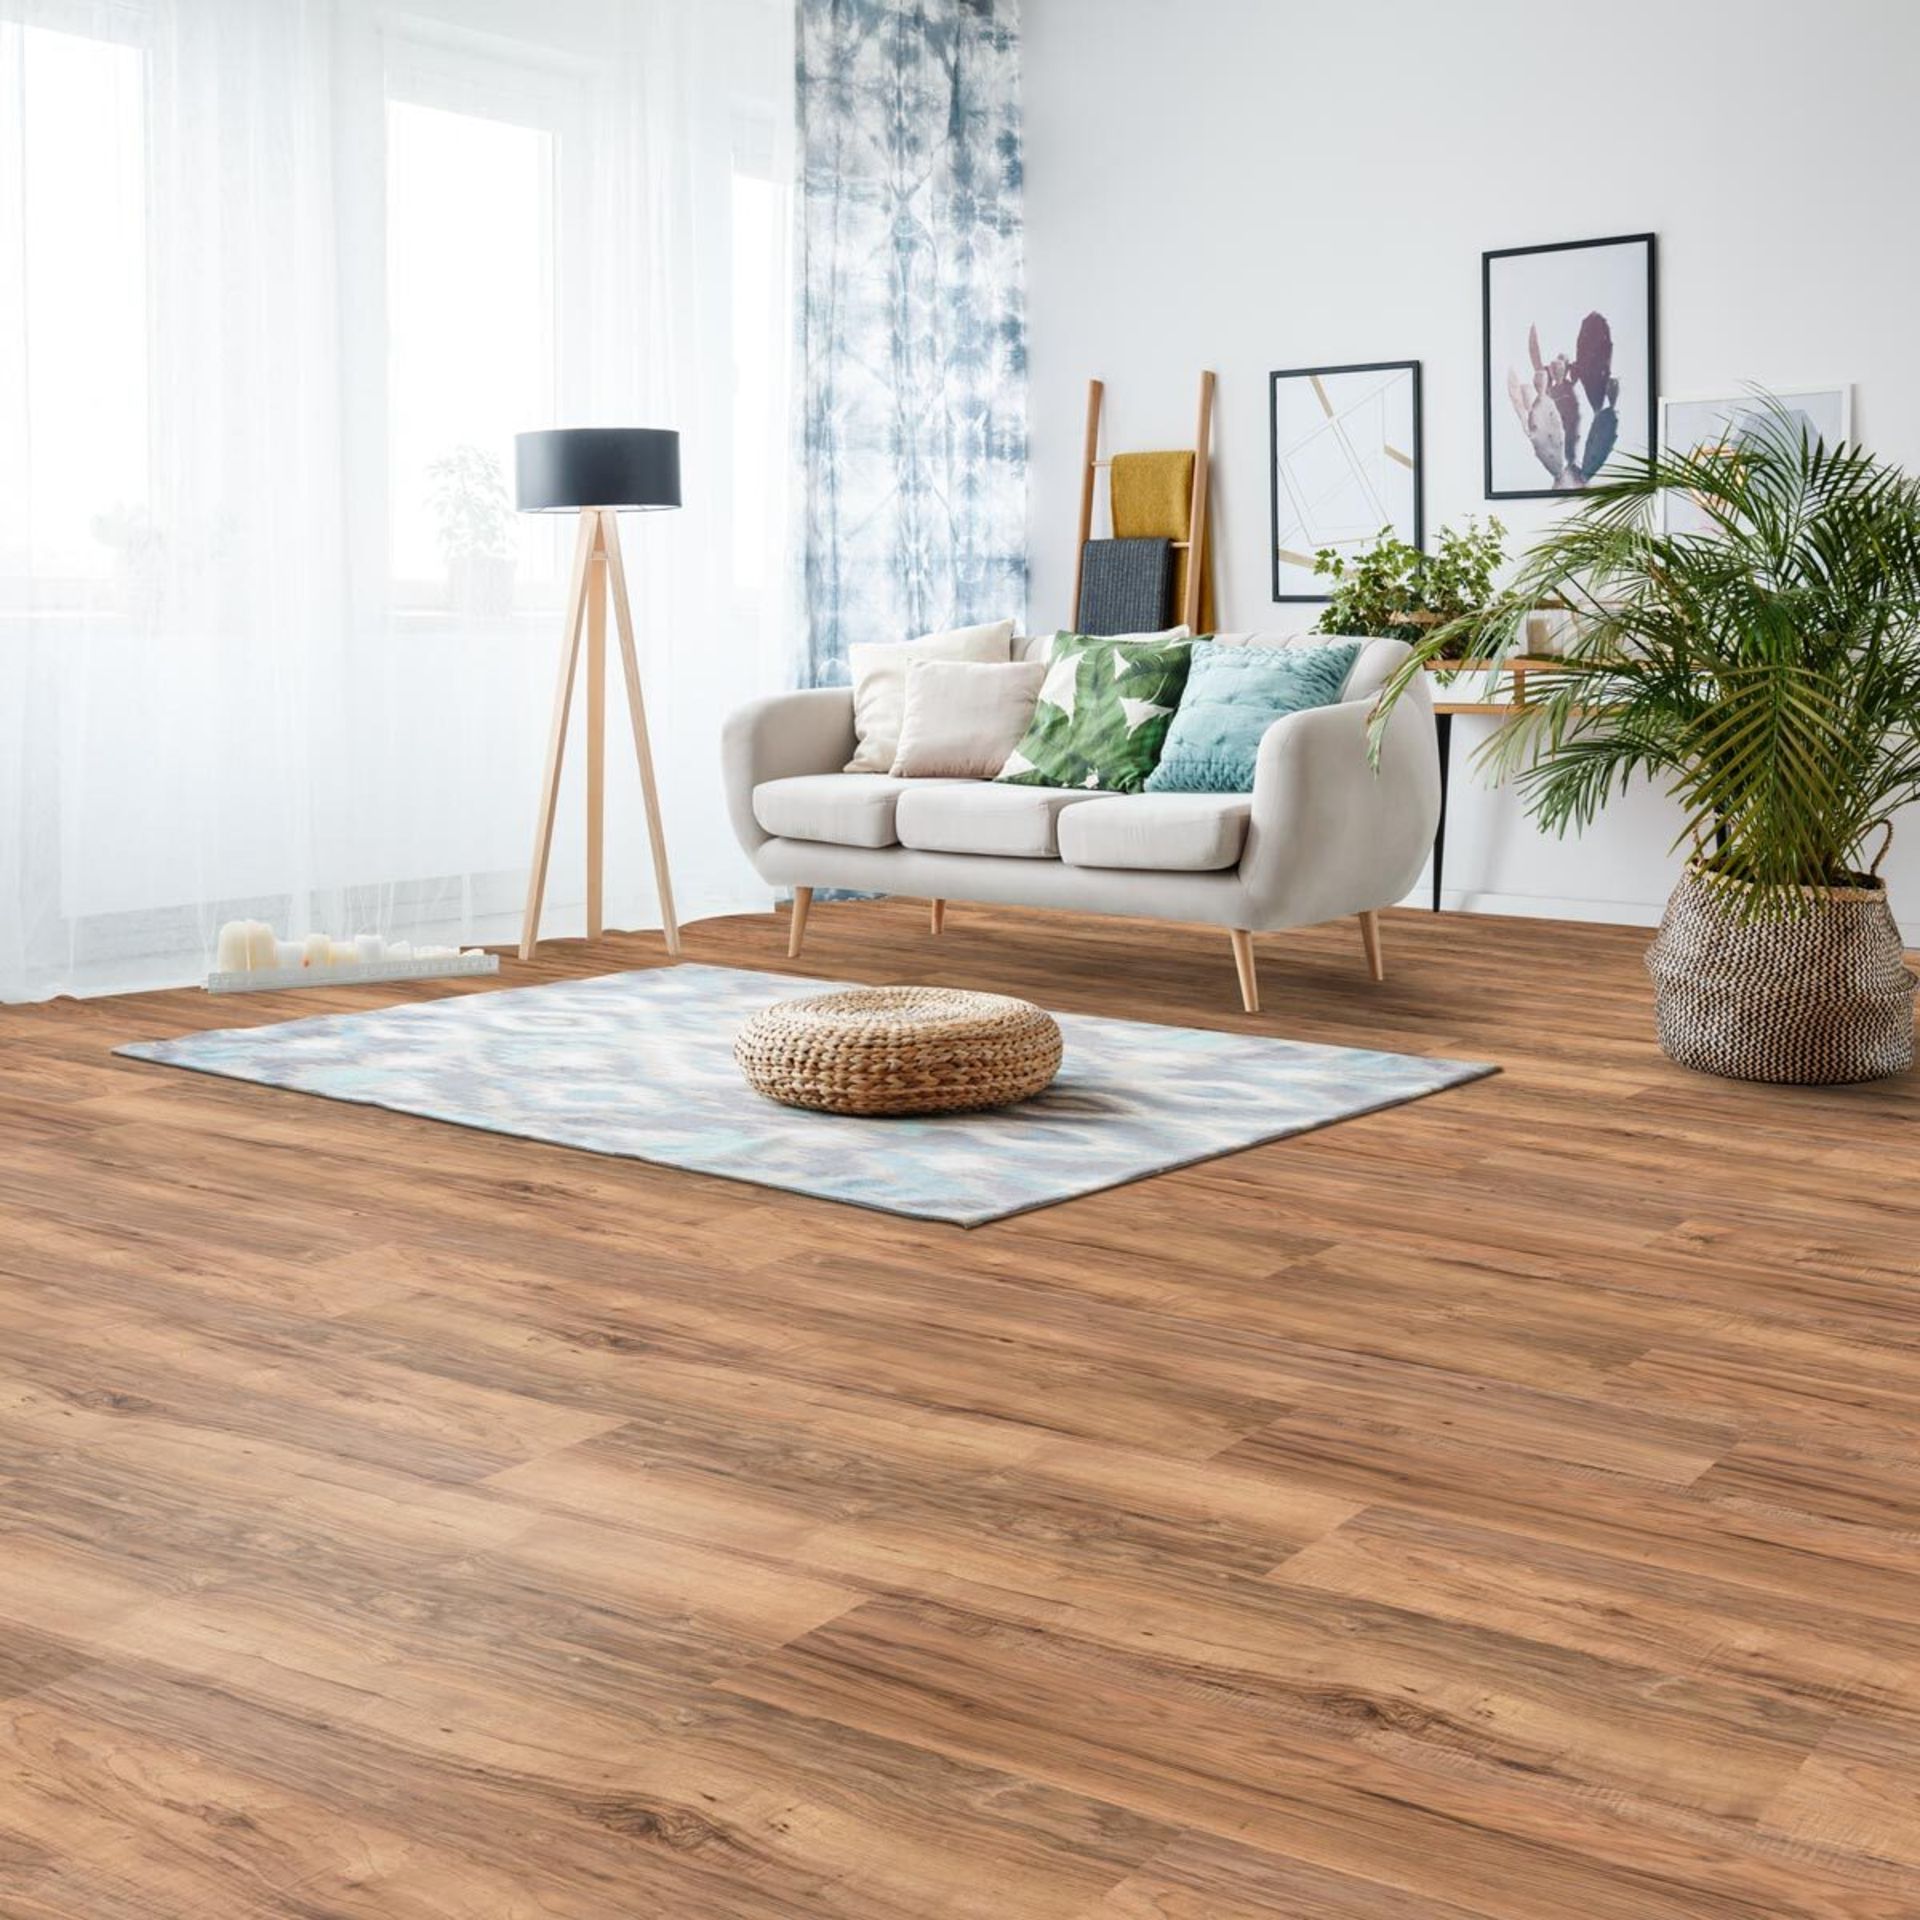 1 BOXED GOLDEN SELECT LAMINATE FLOORING IN TOLEDO WALNUT (COVERS APPROXIMATELY 1.162m2 PER BOX)